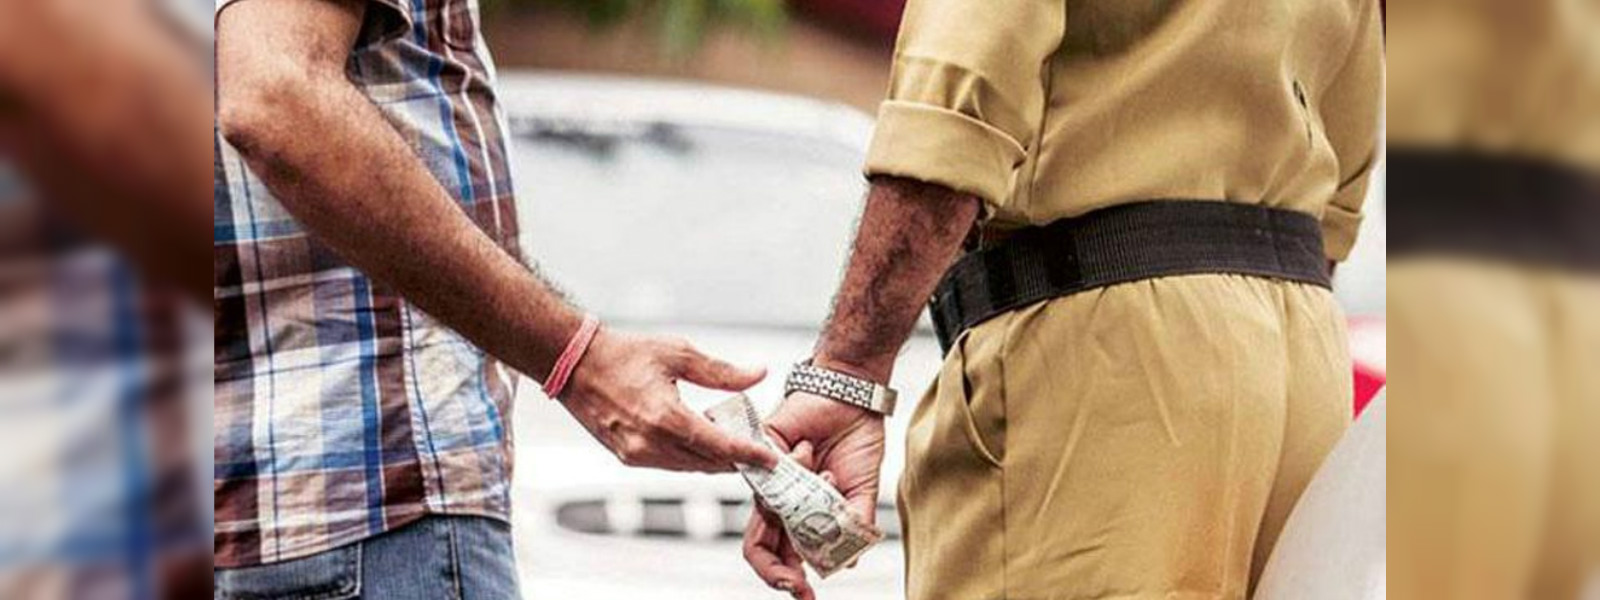 Man arrested attempting to bribe a police officer